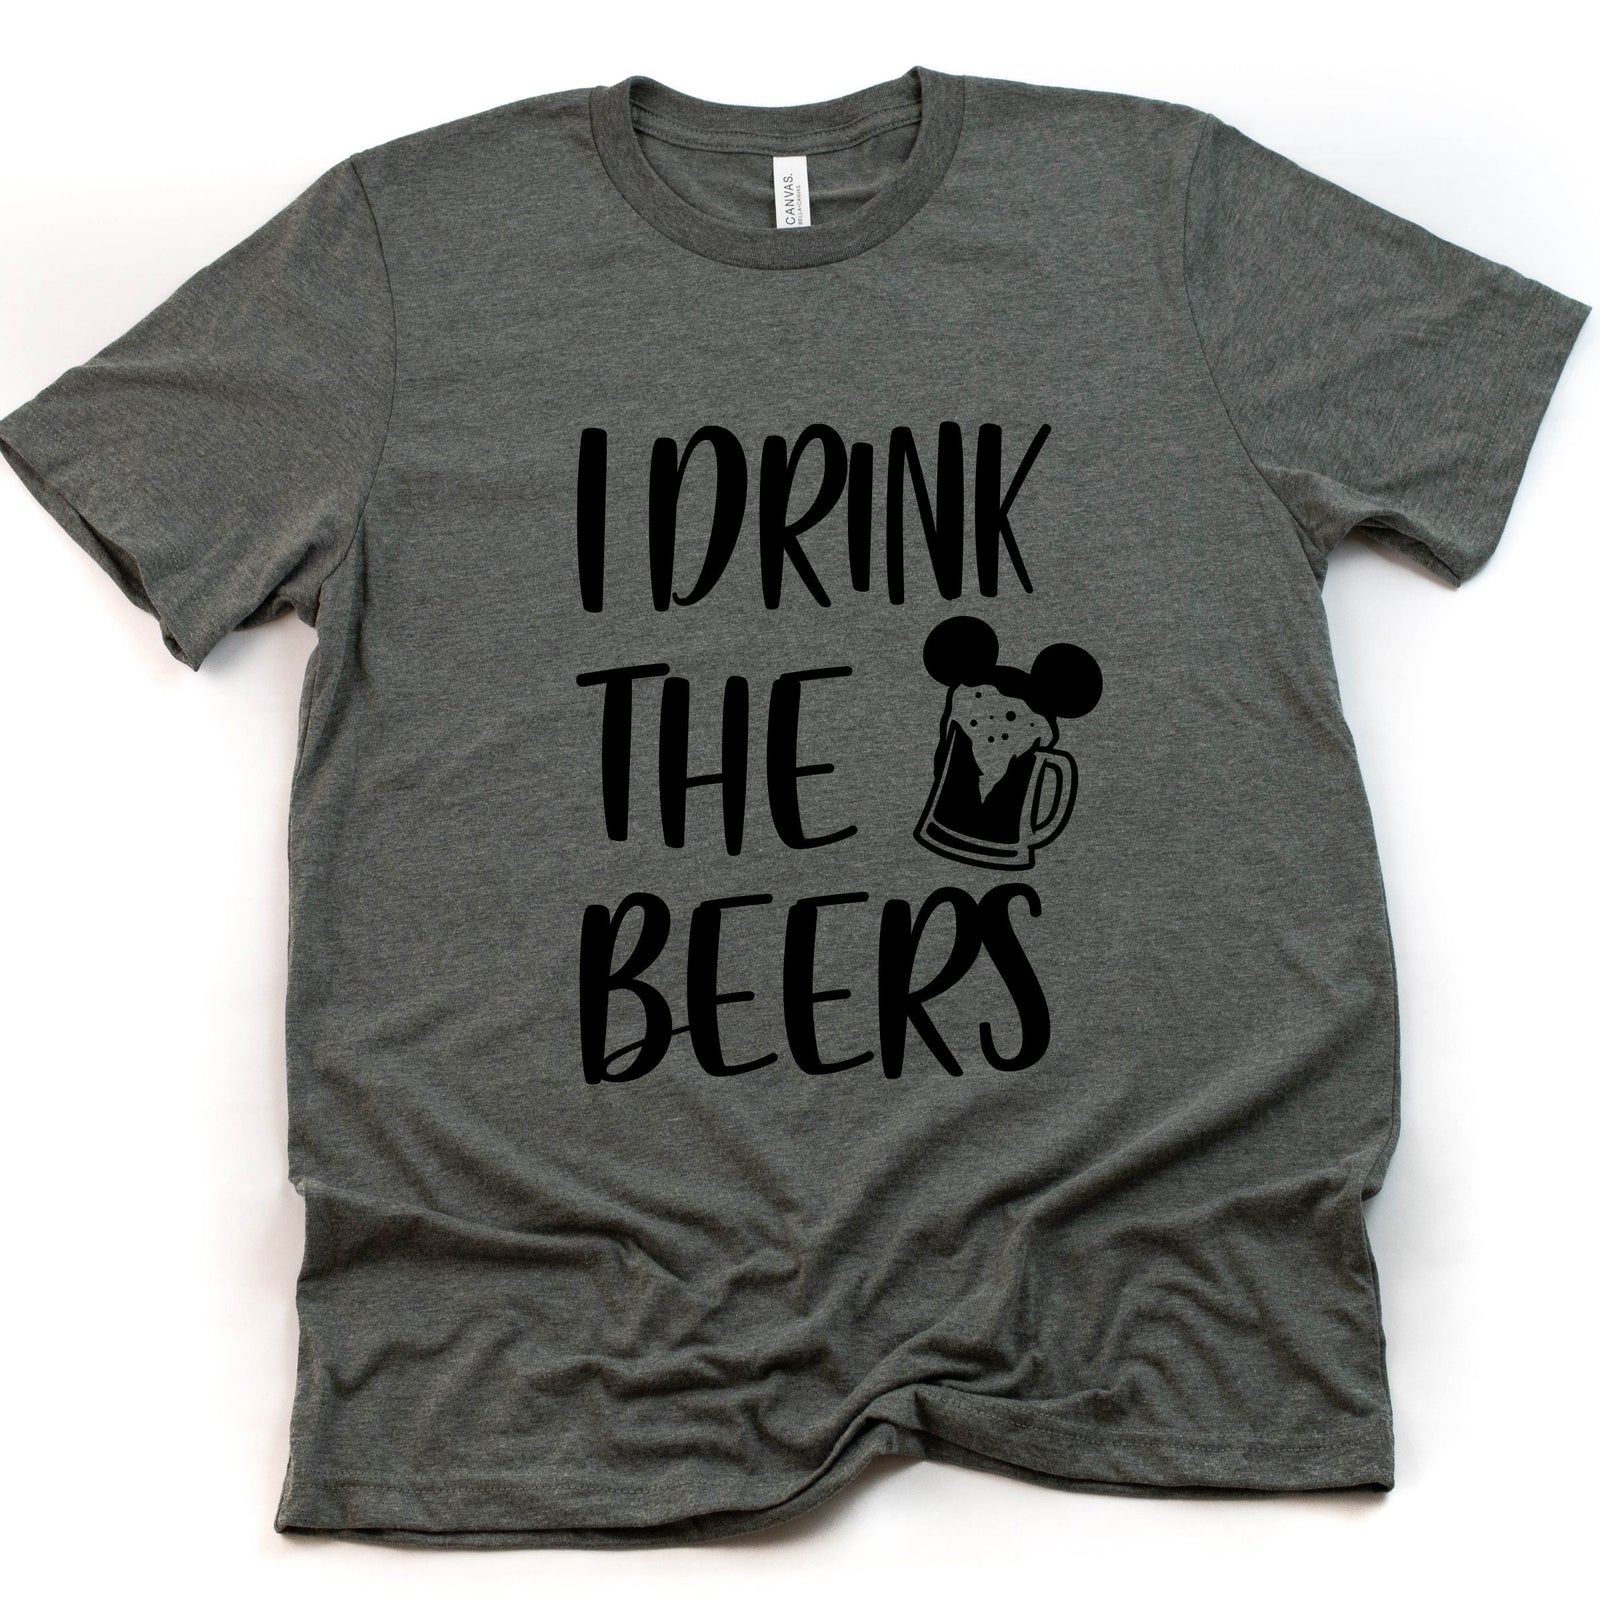 I Drink the Beers Adult Unisex T Shirt - Disney Epcot Drinking Shirt - Fun Tees